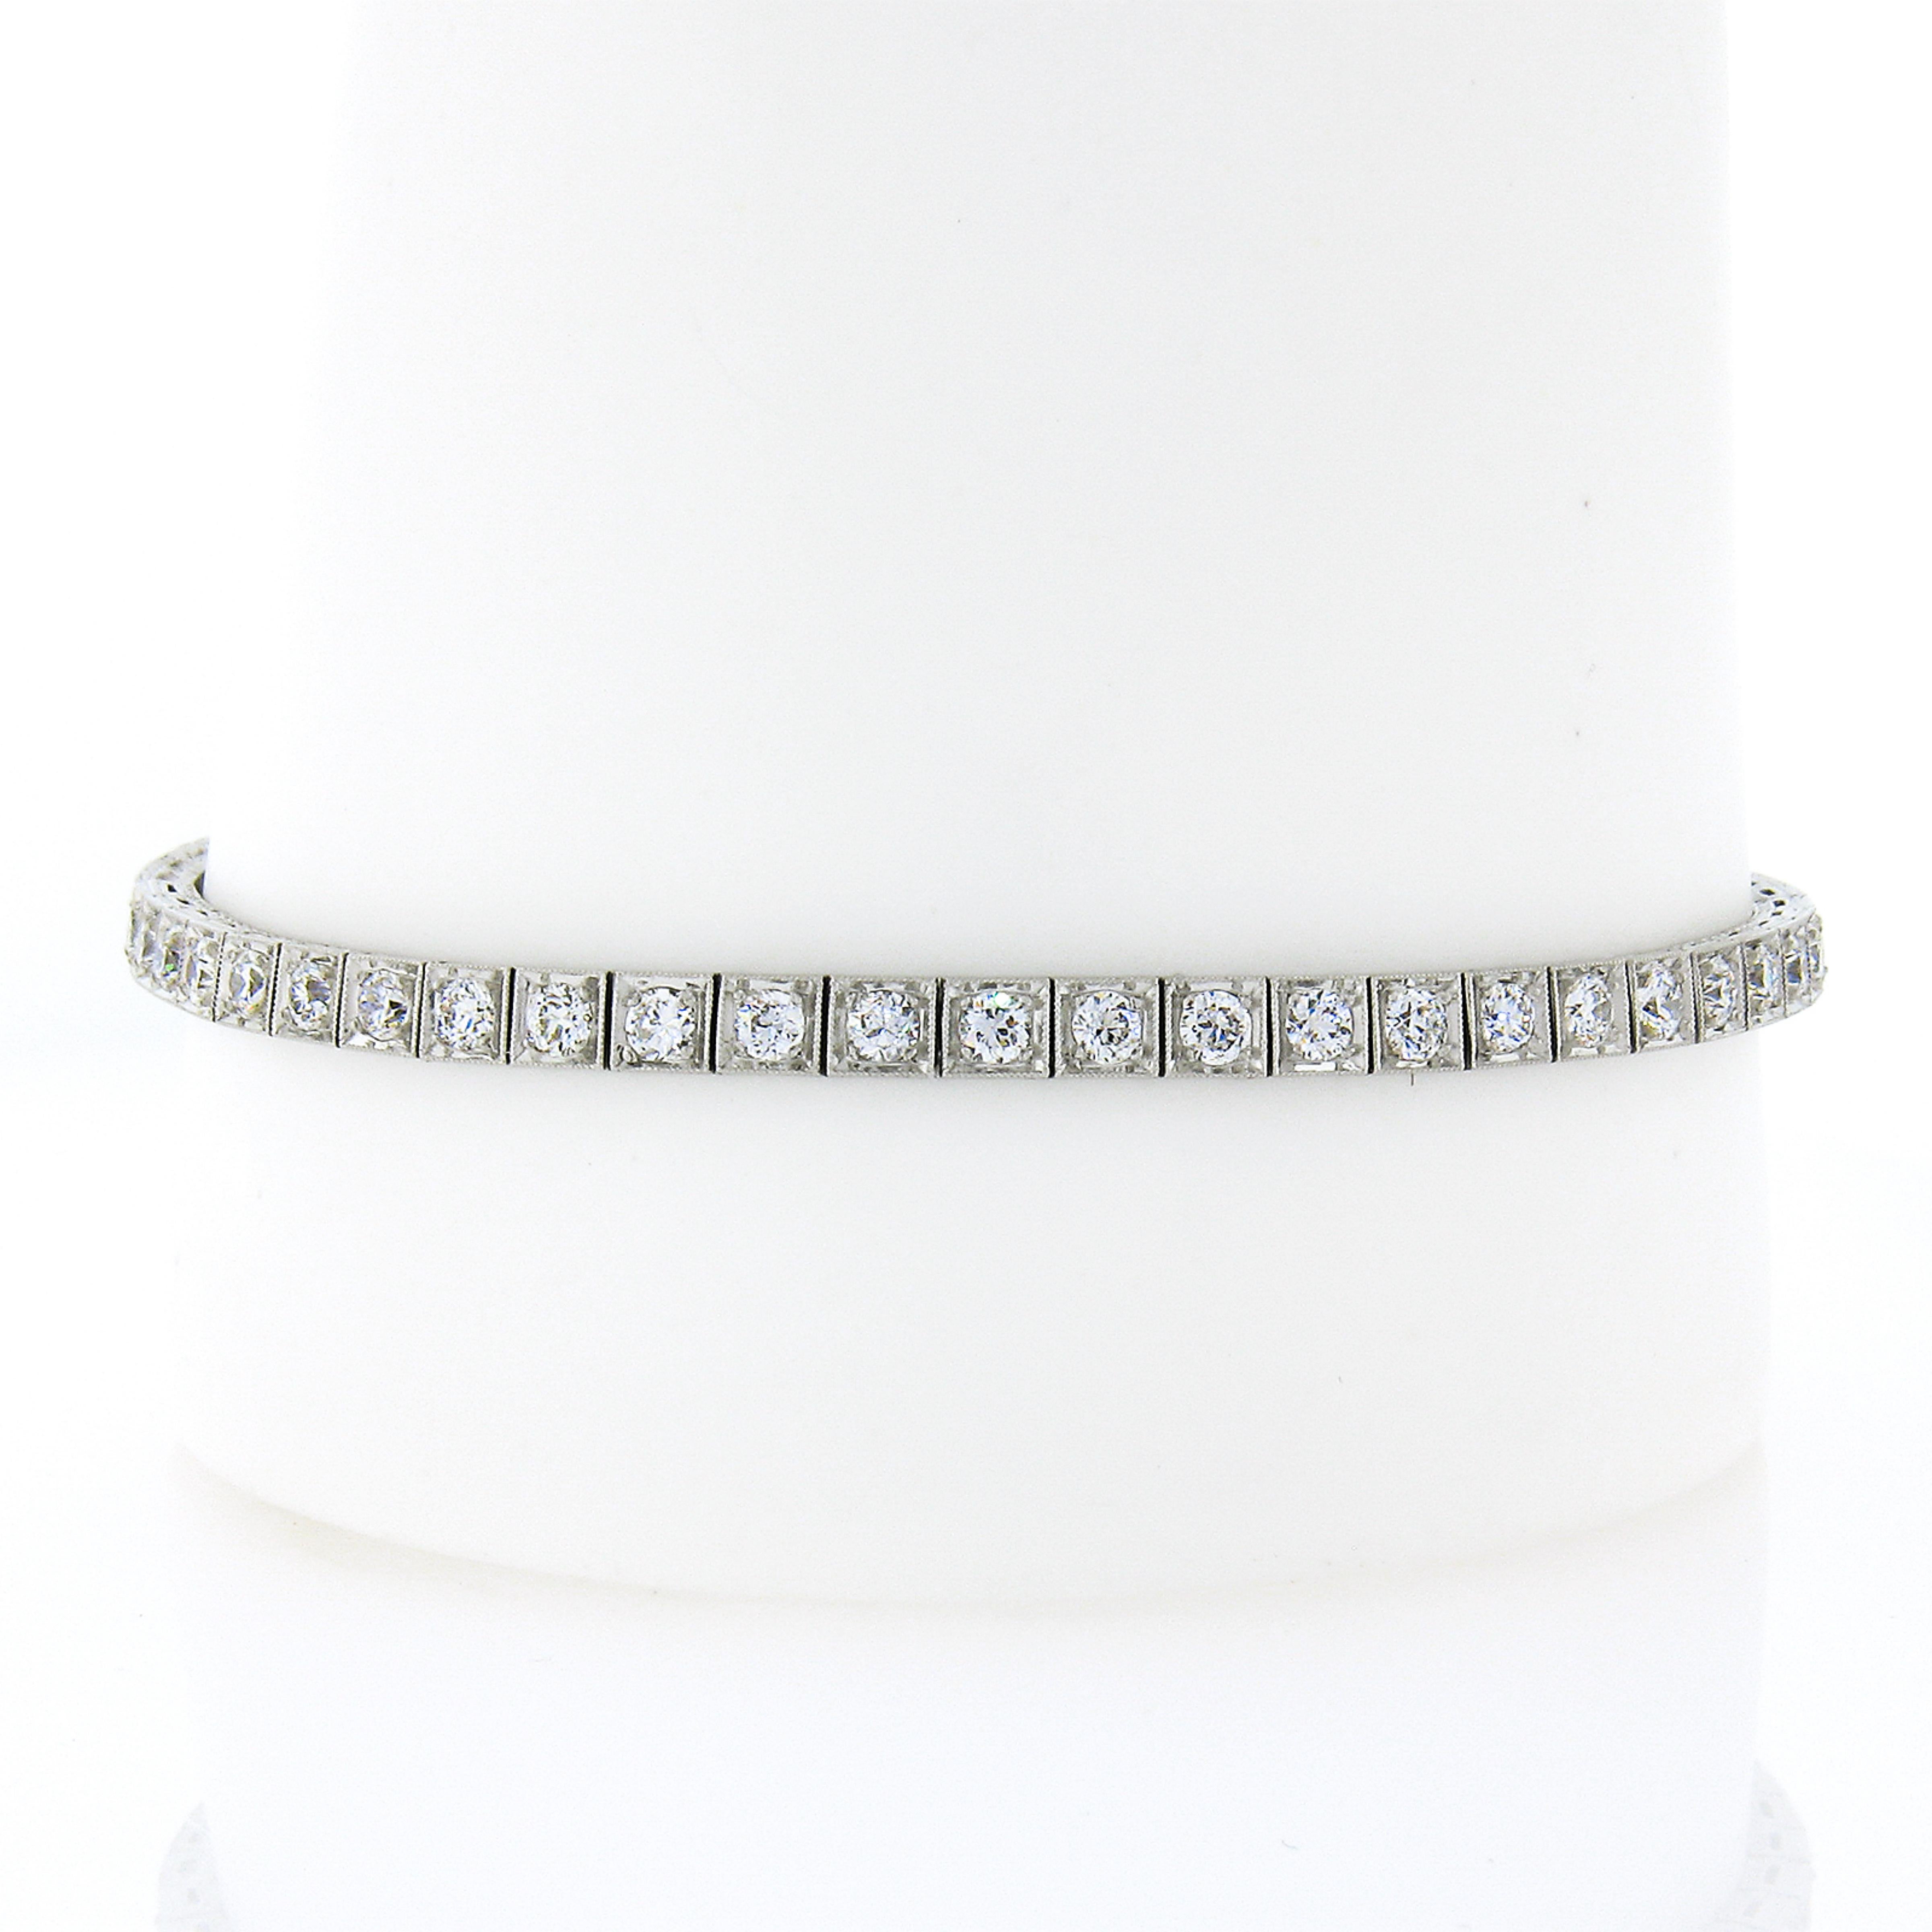 Here we have a gorgeous classic antique art deco diamond tennis bracelet crafted in solid platinum and features 52 old European and transitional cut diamonds neatly set in square prong settings and decorated with Milgrain etching technique